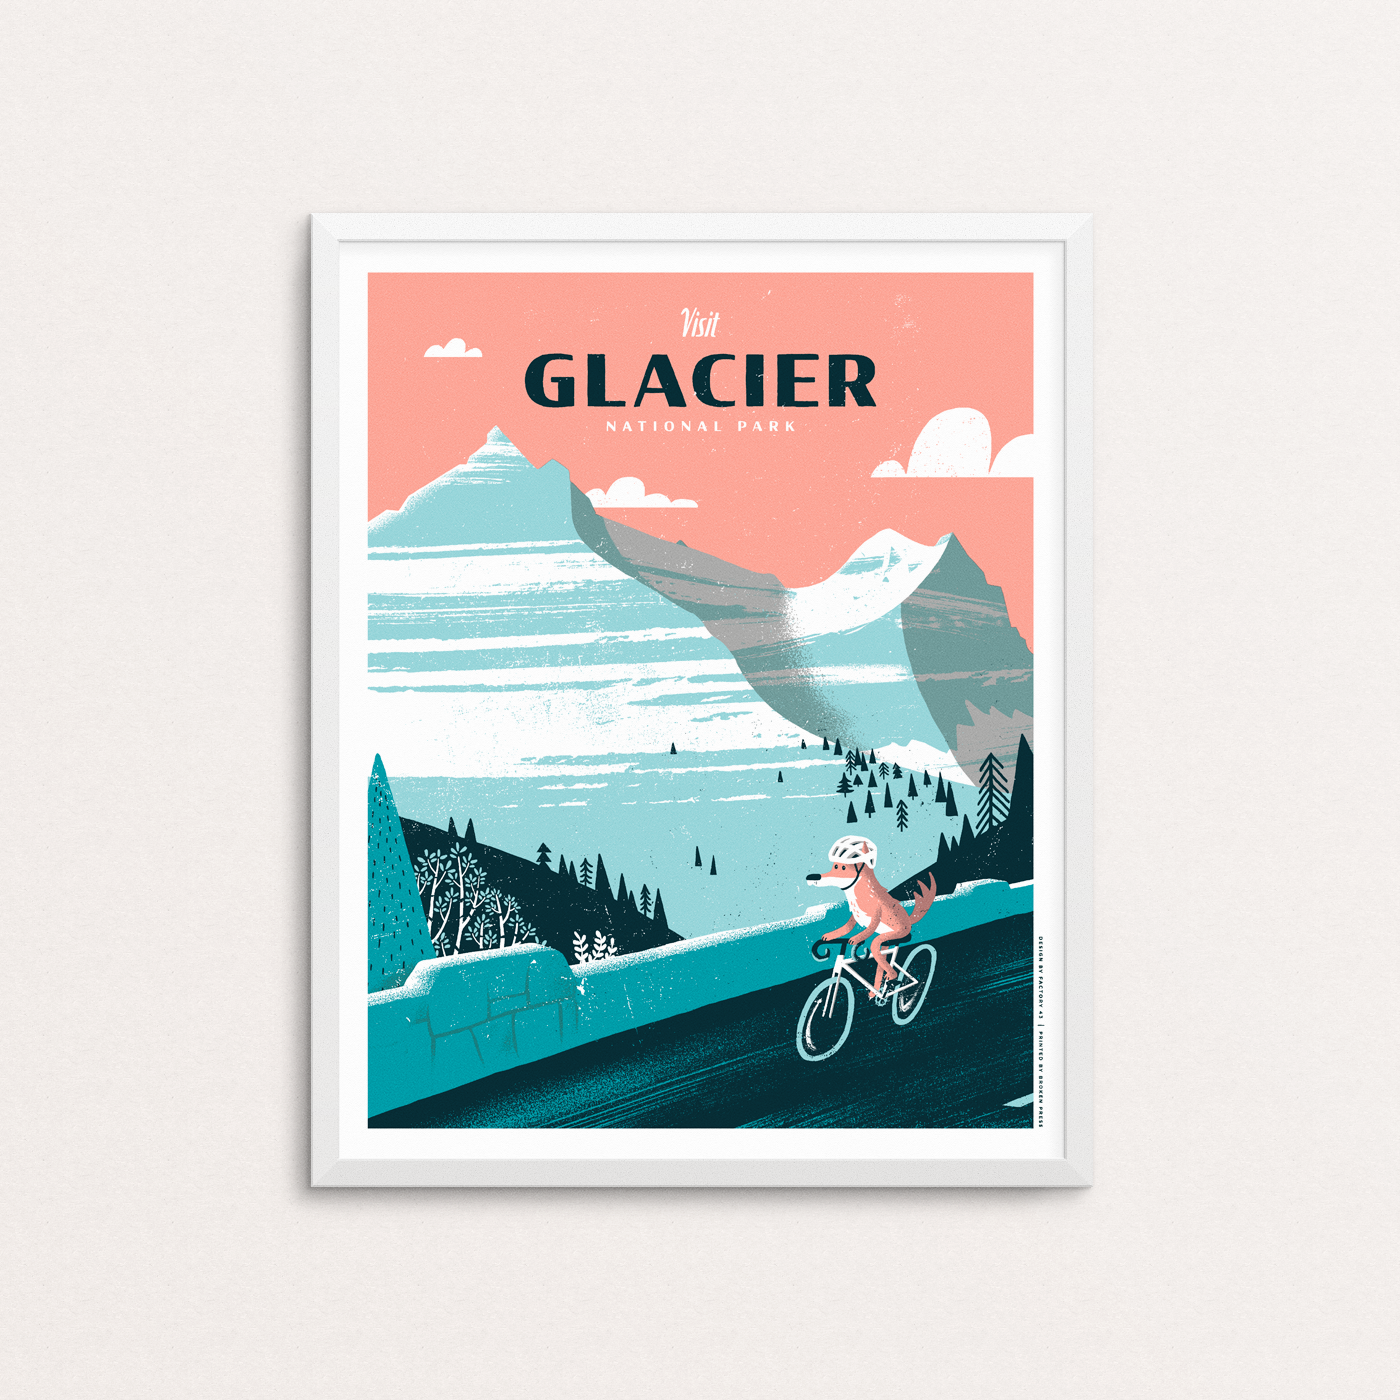 A wolverine takes a scenic bike ride in Glacier National Park in Montana. Poster shown in white frame.